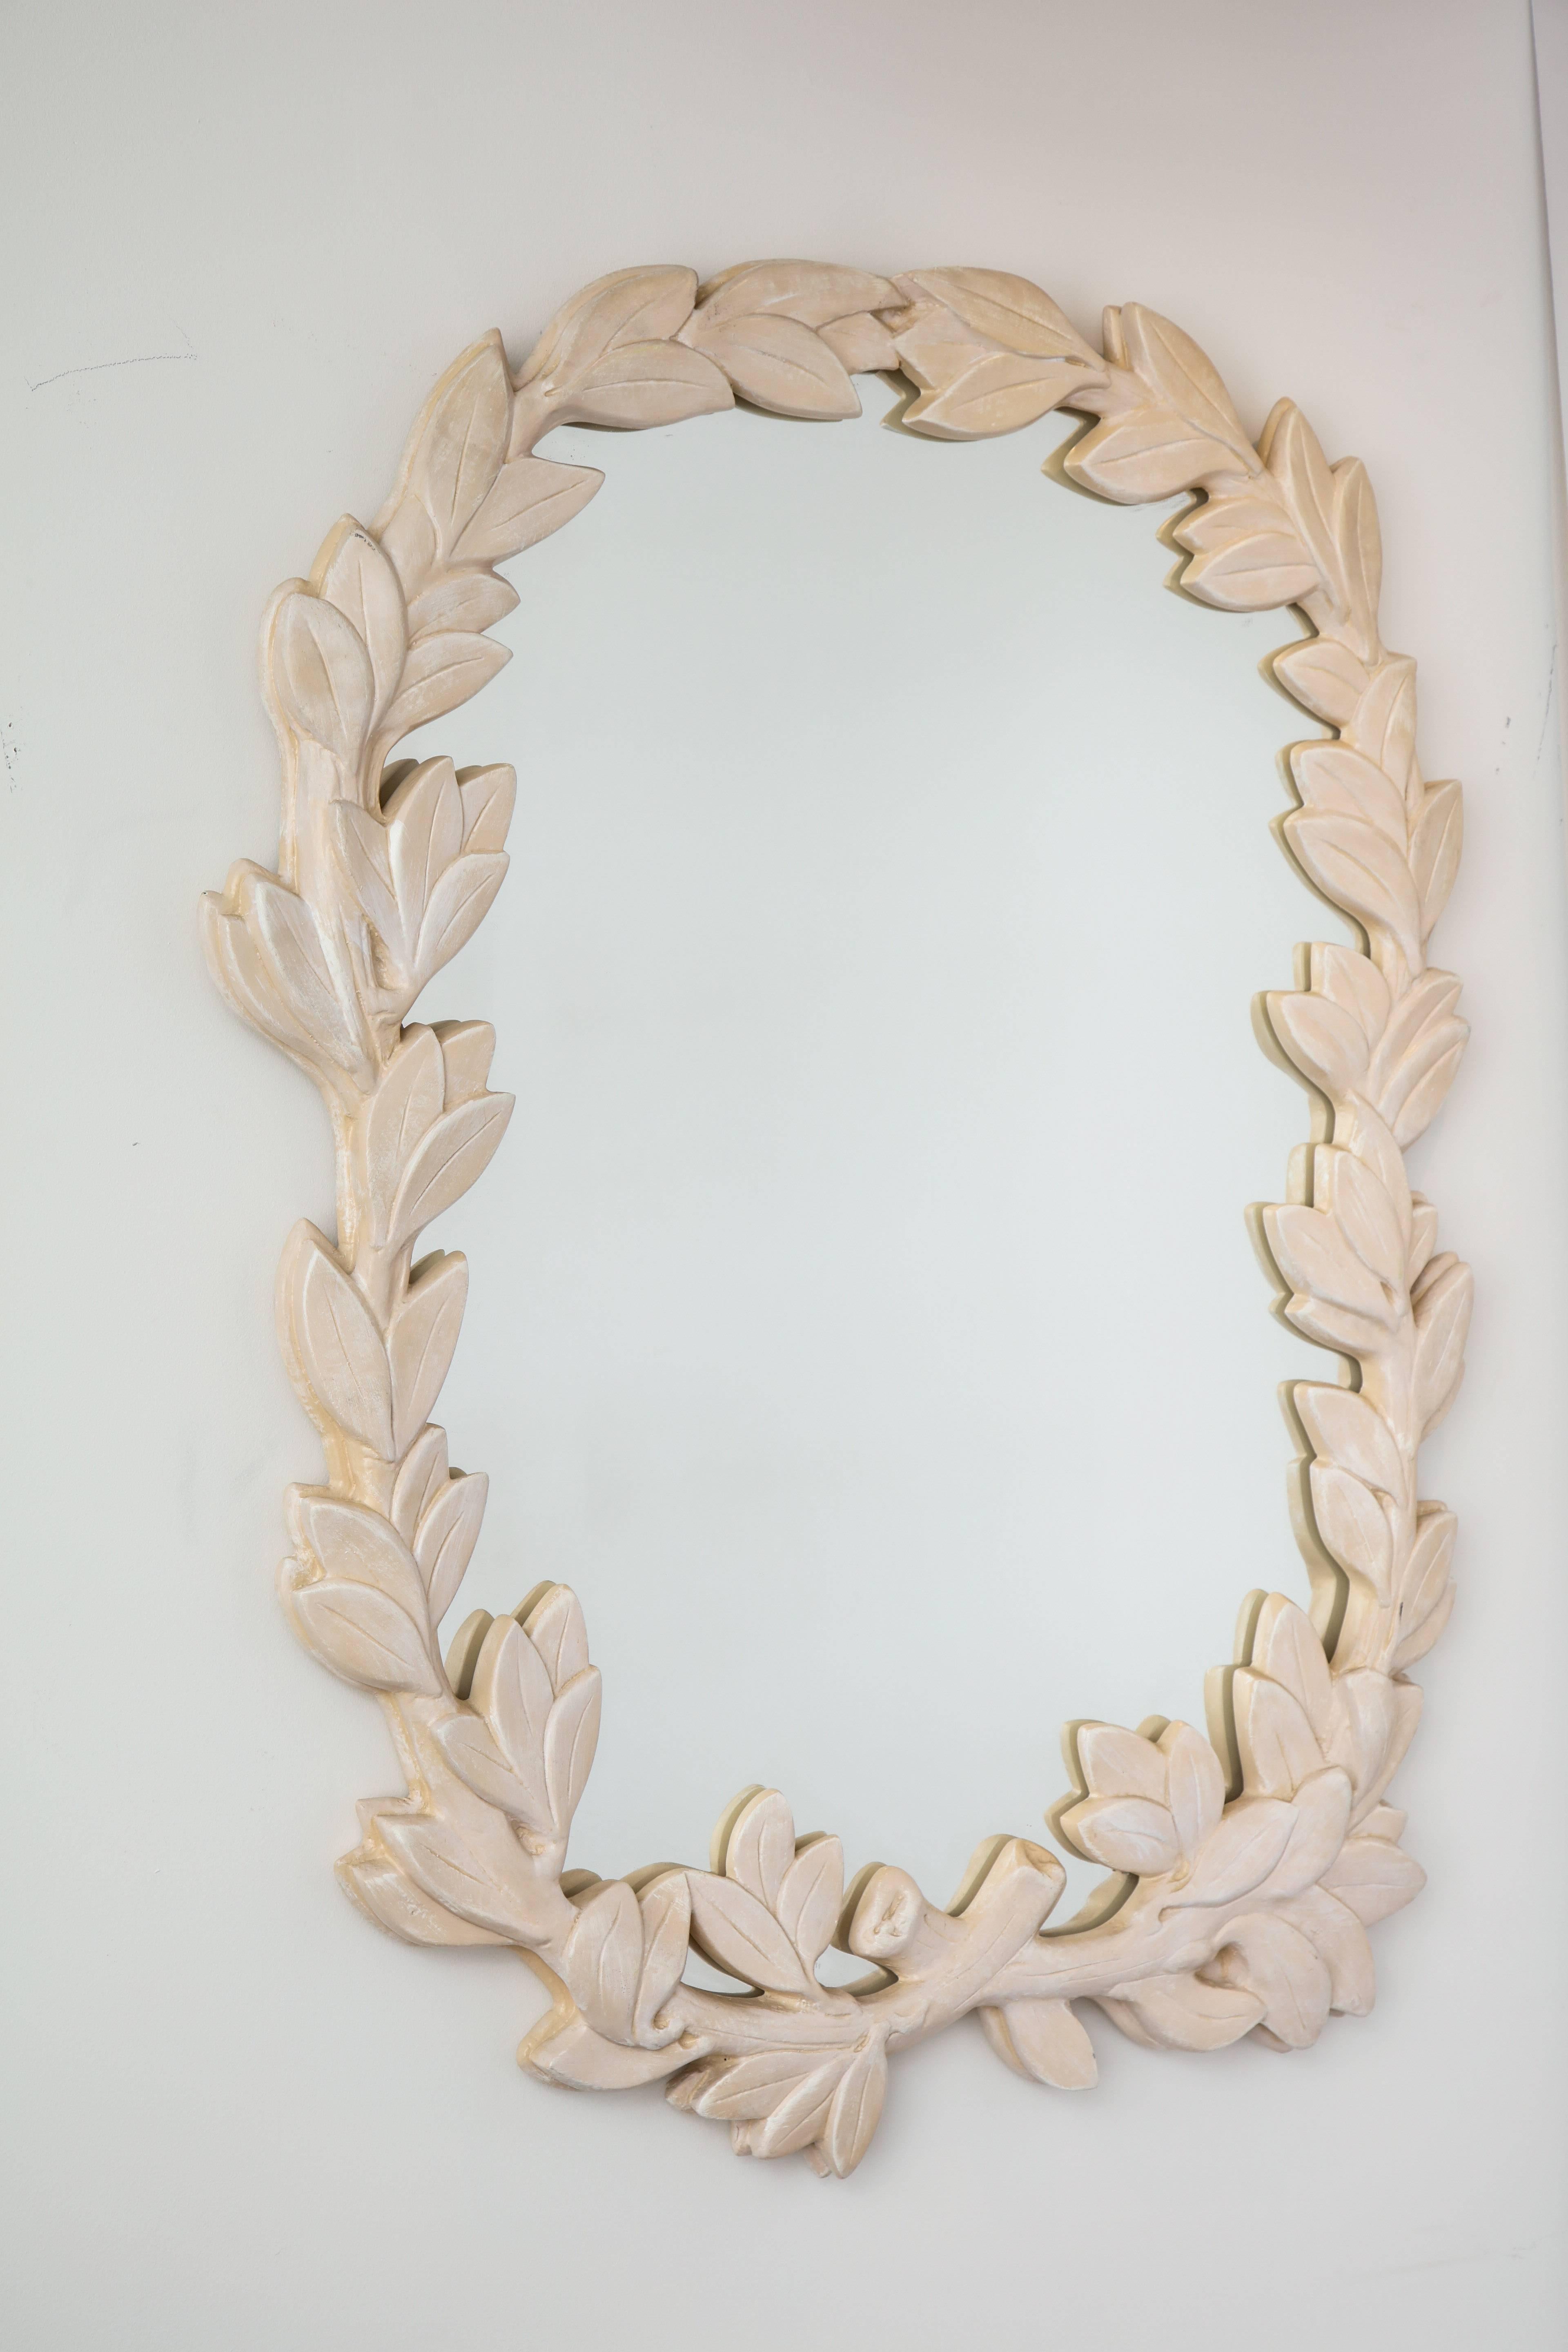 Elegant plaster composition mirror in the form of an asymmetrical wreath of leaves by Los Angeles designer Phyllis Morris.